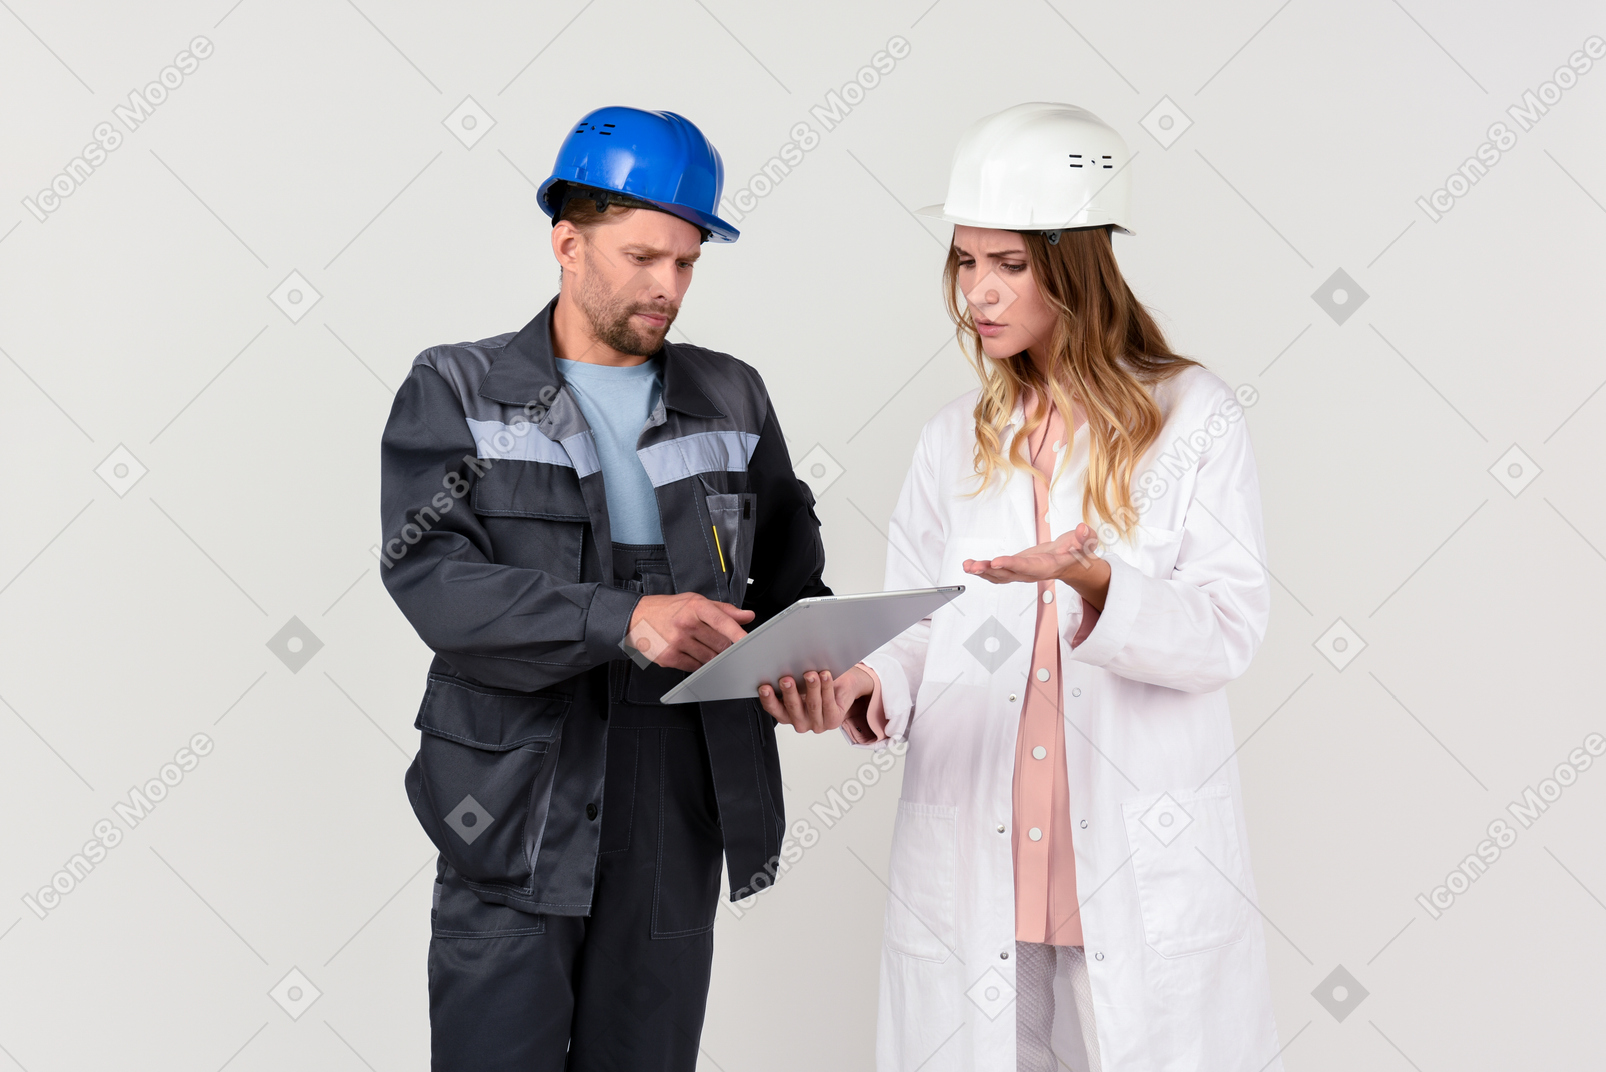 Female and male engineer colleagues discussing some work stuff